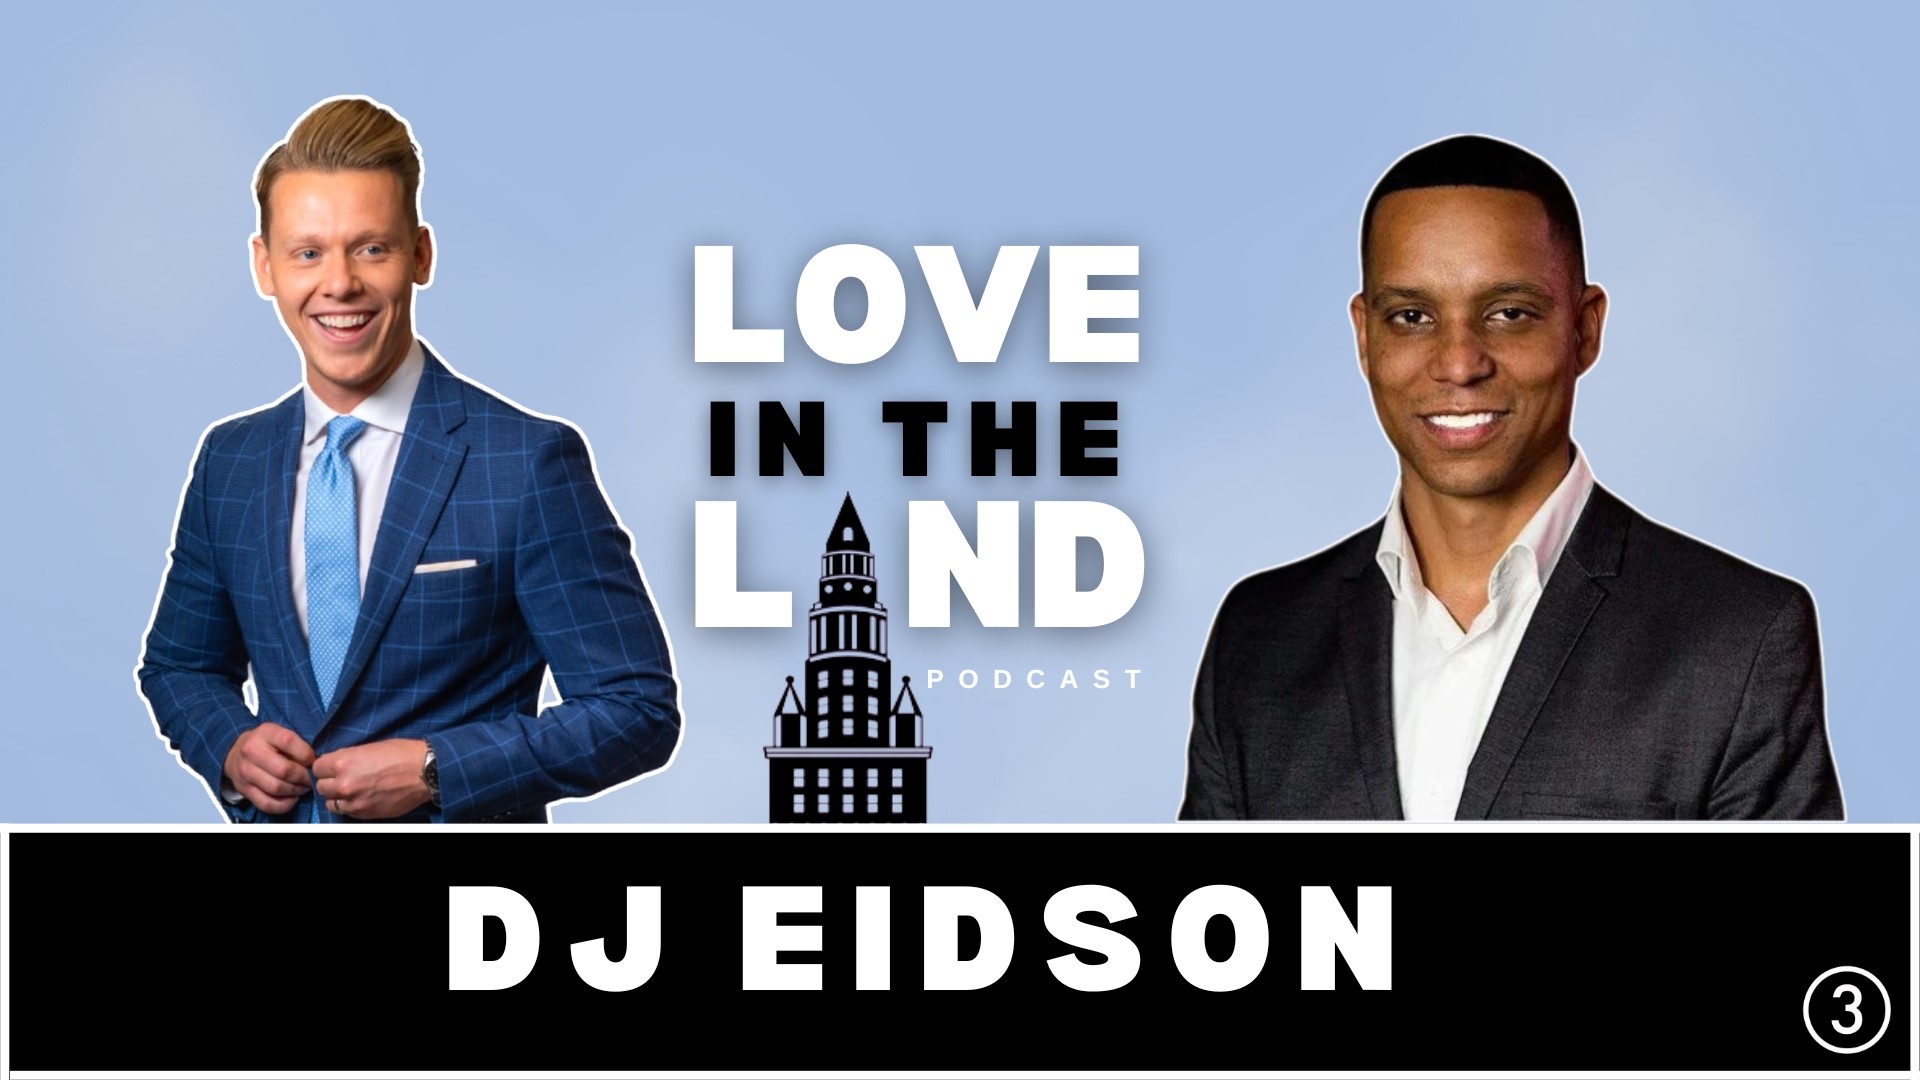 In this 'Love in the Land' podcast, Austin Love welcomes DJ Eidson, a dynamic Cleveland-based entrepreneur and the Co-Founder and President of Limitless Minds.